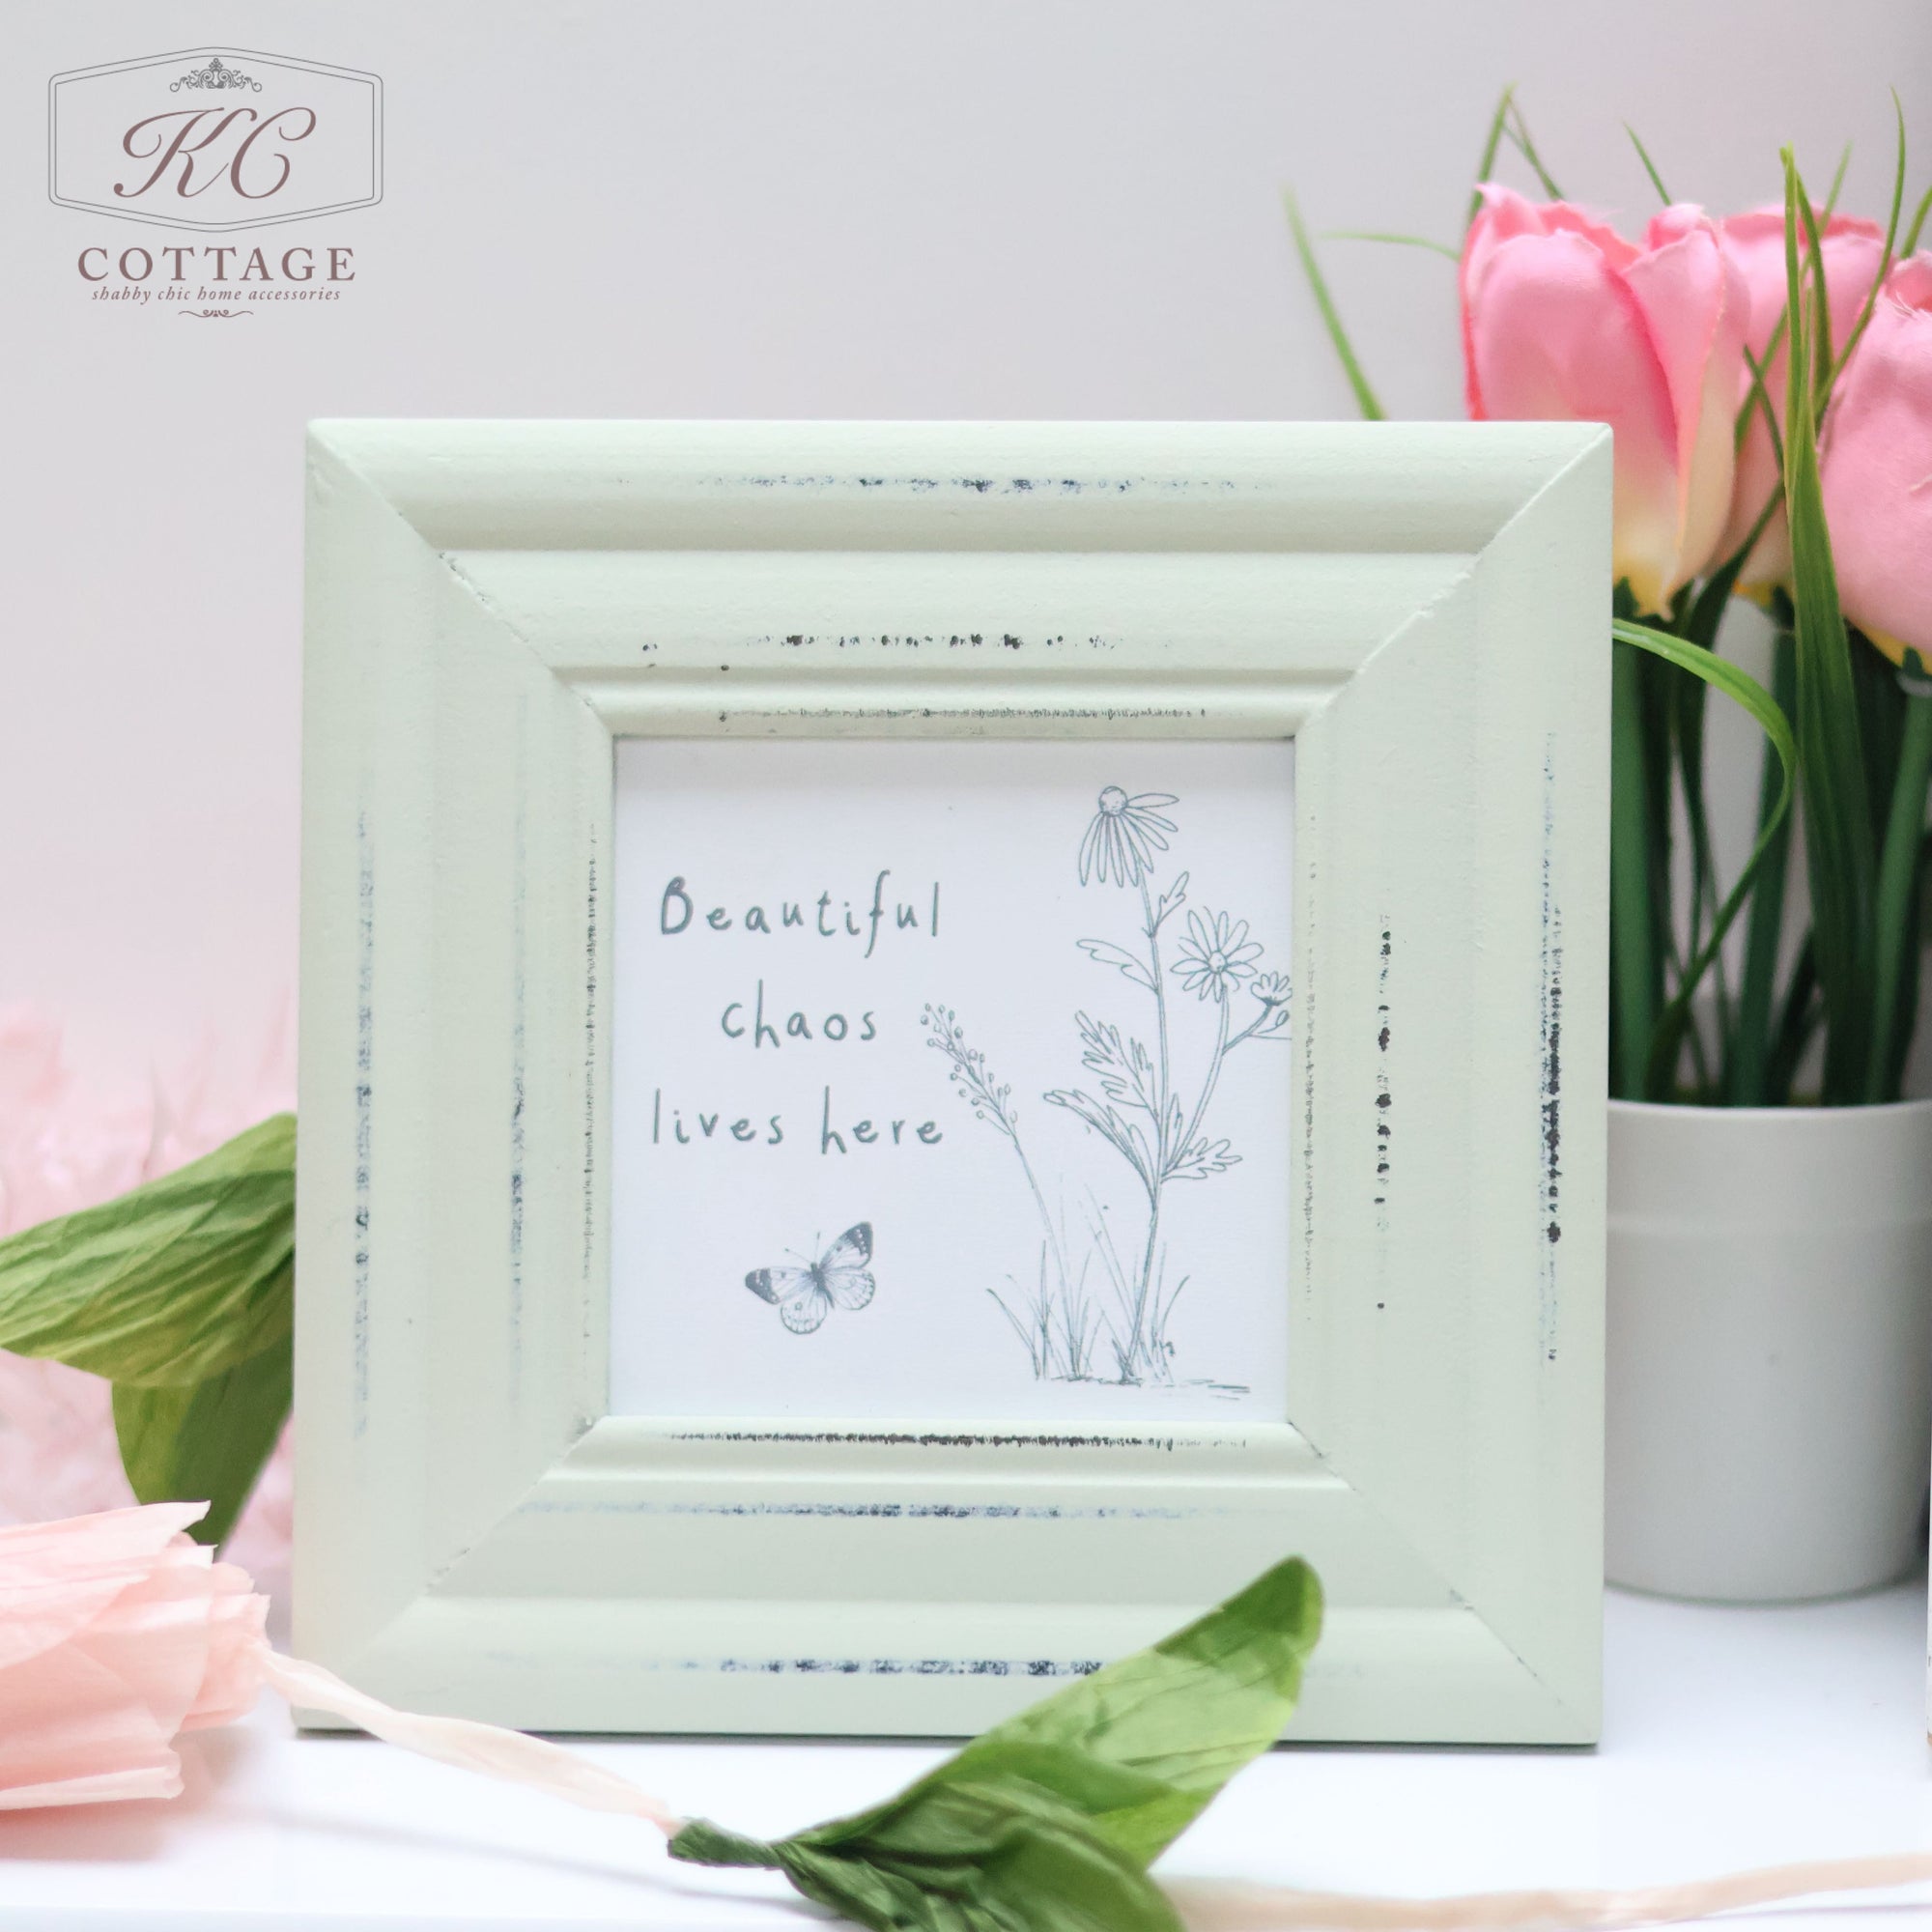 Shabby Chic Style Framed Illustrations - Beautiful chaos lives here